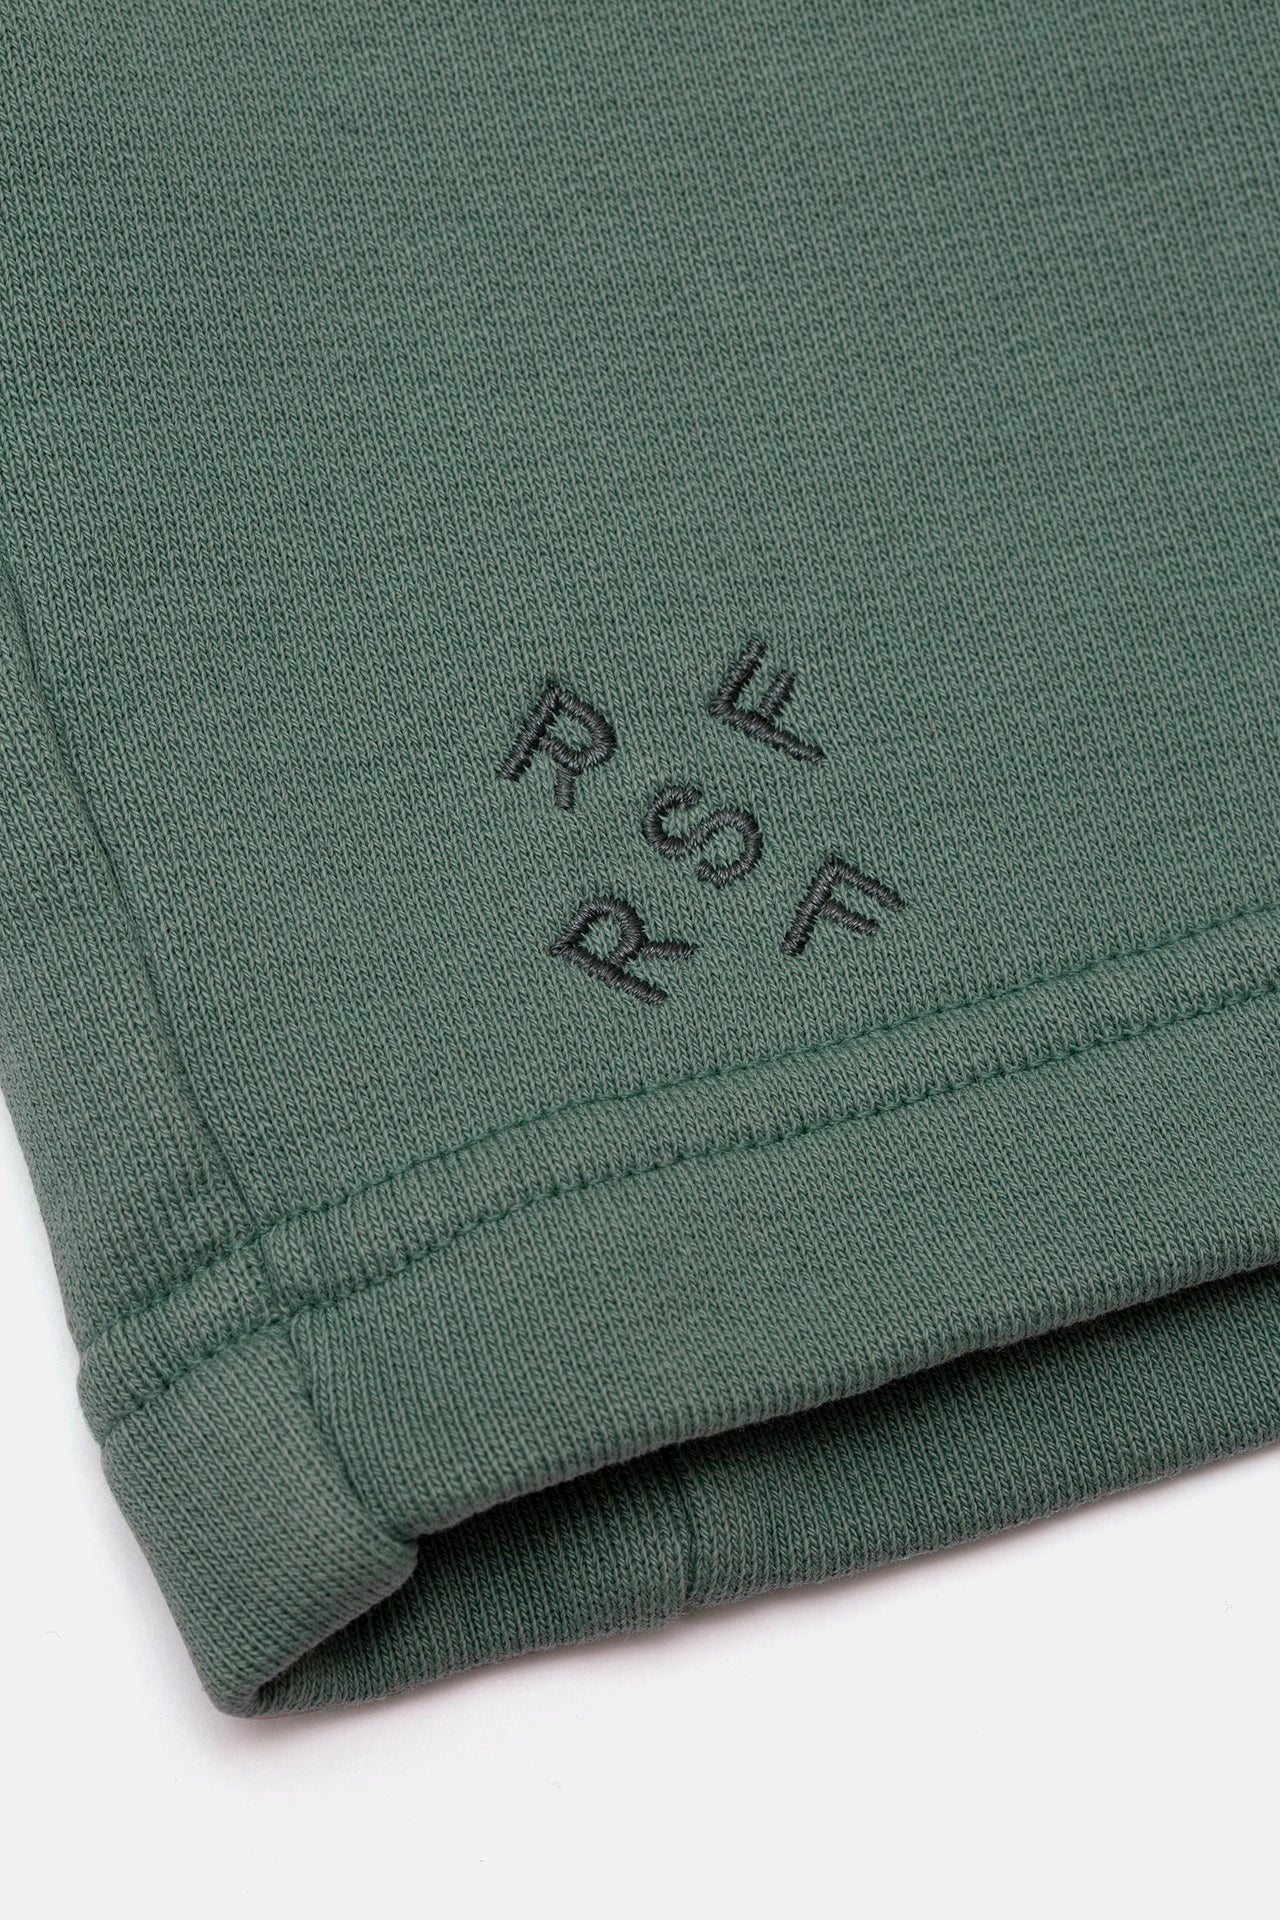 RSF x DC Deconstructed Terry Shorts Mint - Retrosuperfuture -